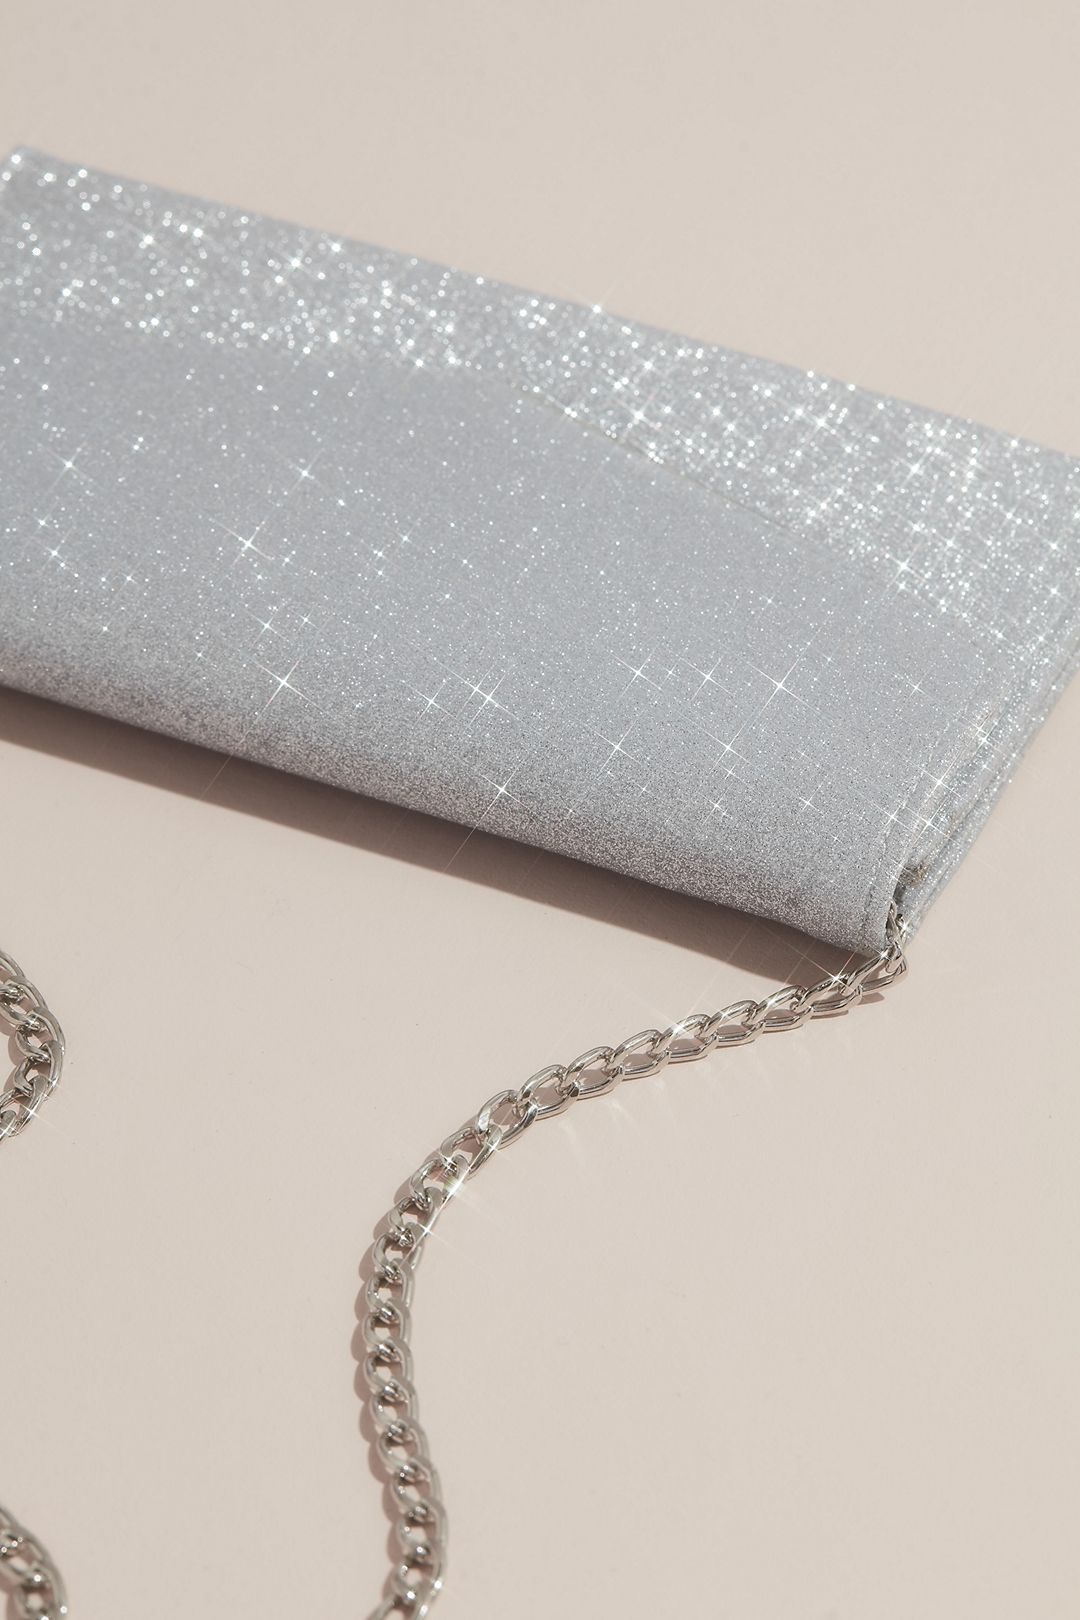 Glitter Envelope Clutch with Metal Edge Image 3